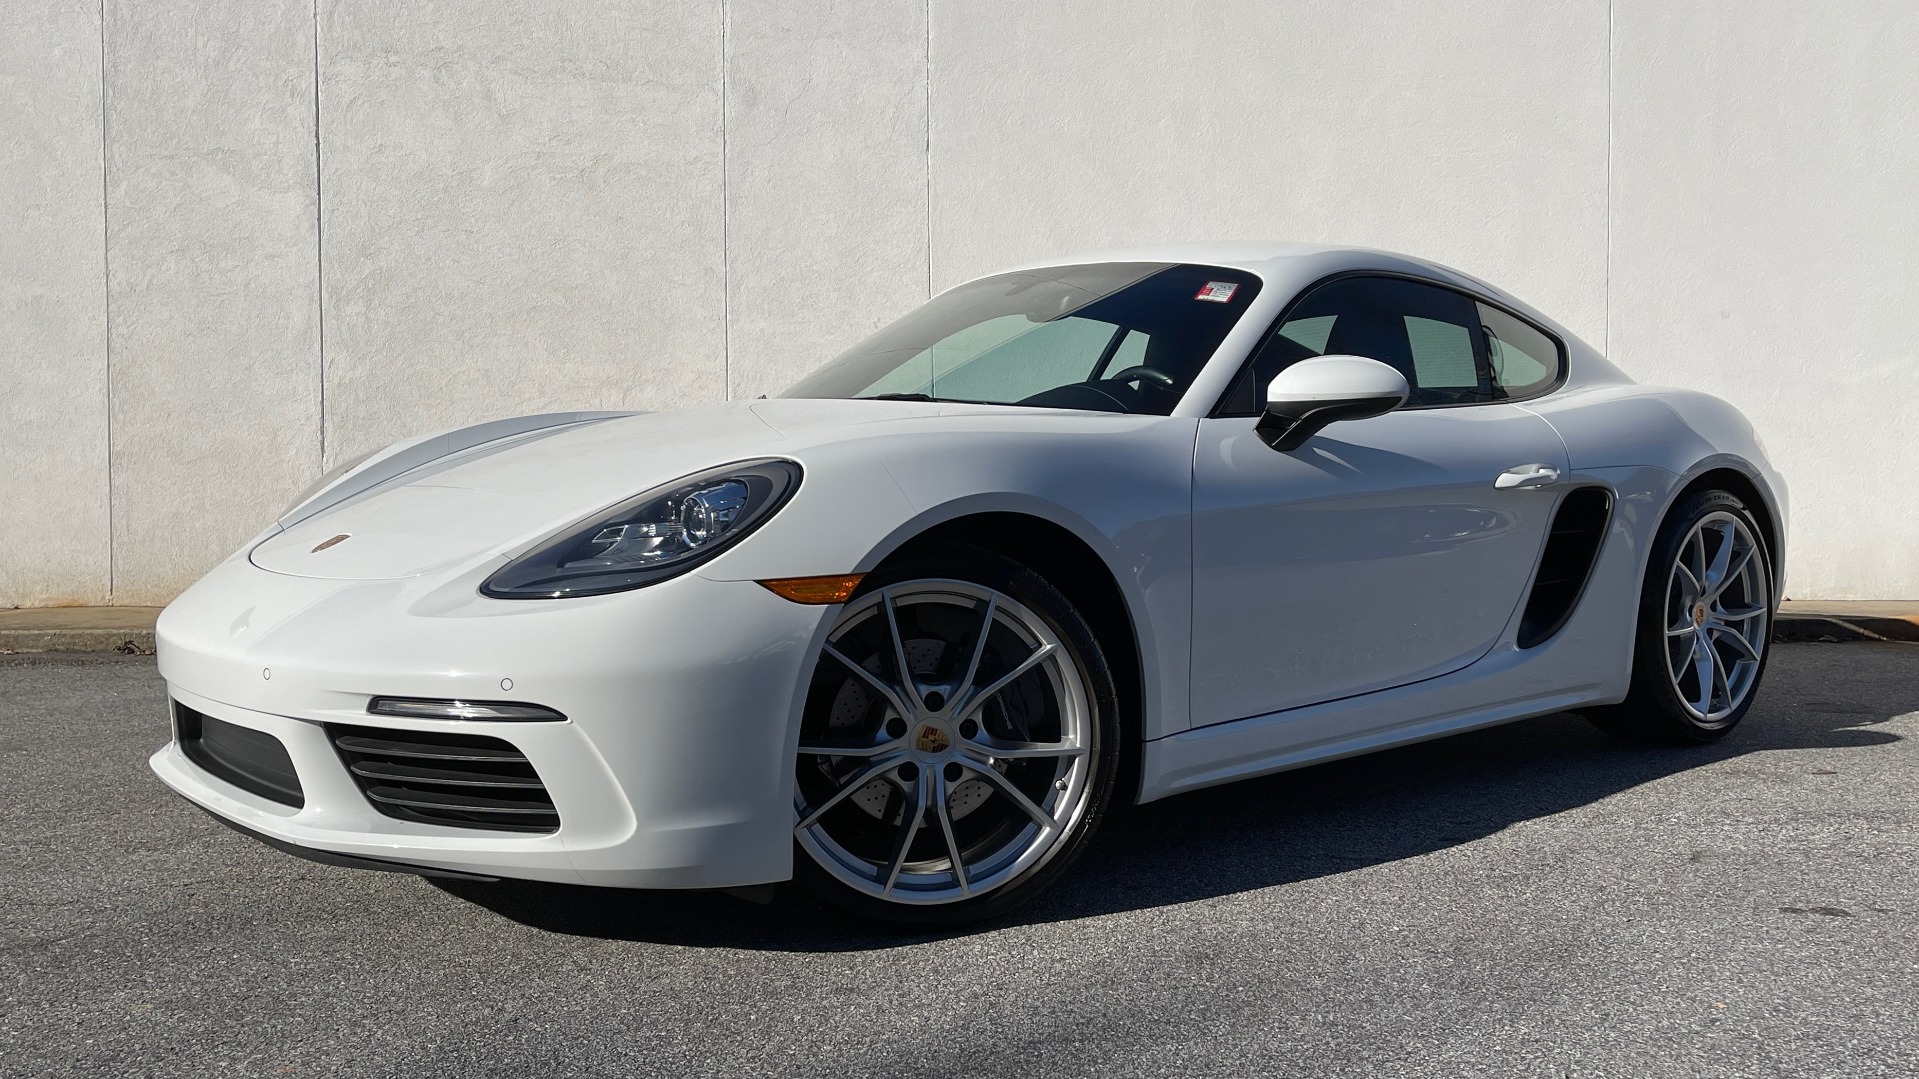 Used 2017 Porsche 718 CAYMAN COUPE / 2.0L TURBO / 6-SPD MANUAL / BOSE / 20-INCH WHEELS for sale $49,395 at Formula Imports in Charlotte NC 28227 1